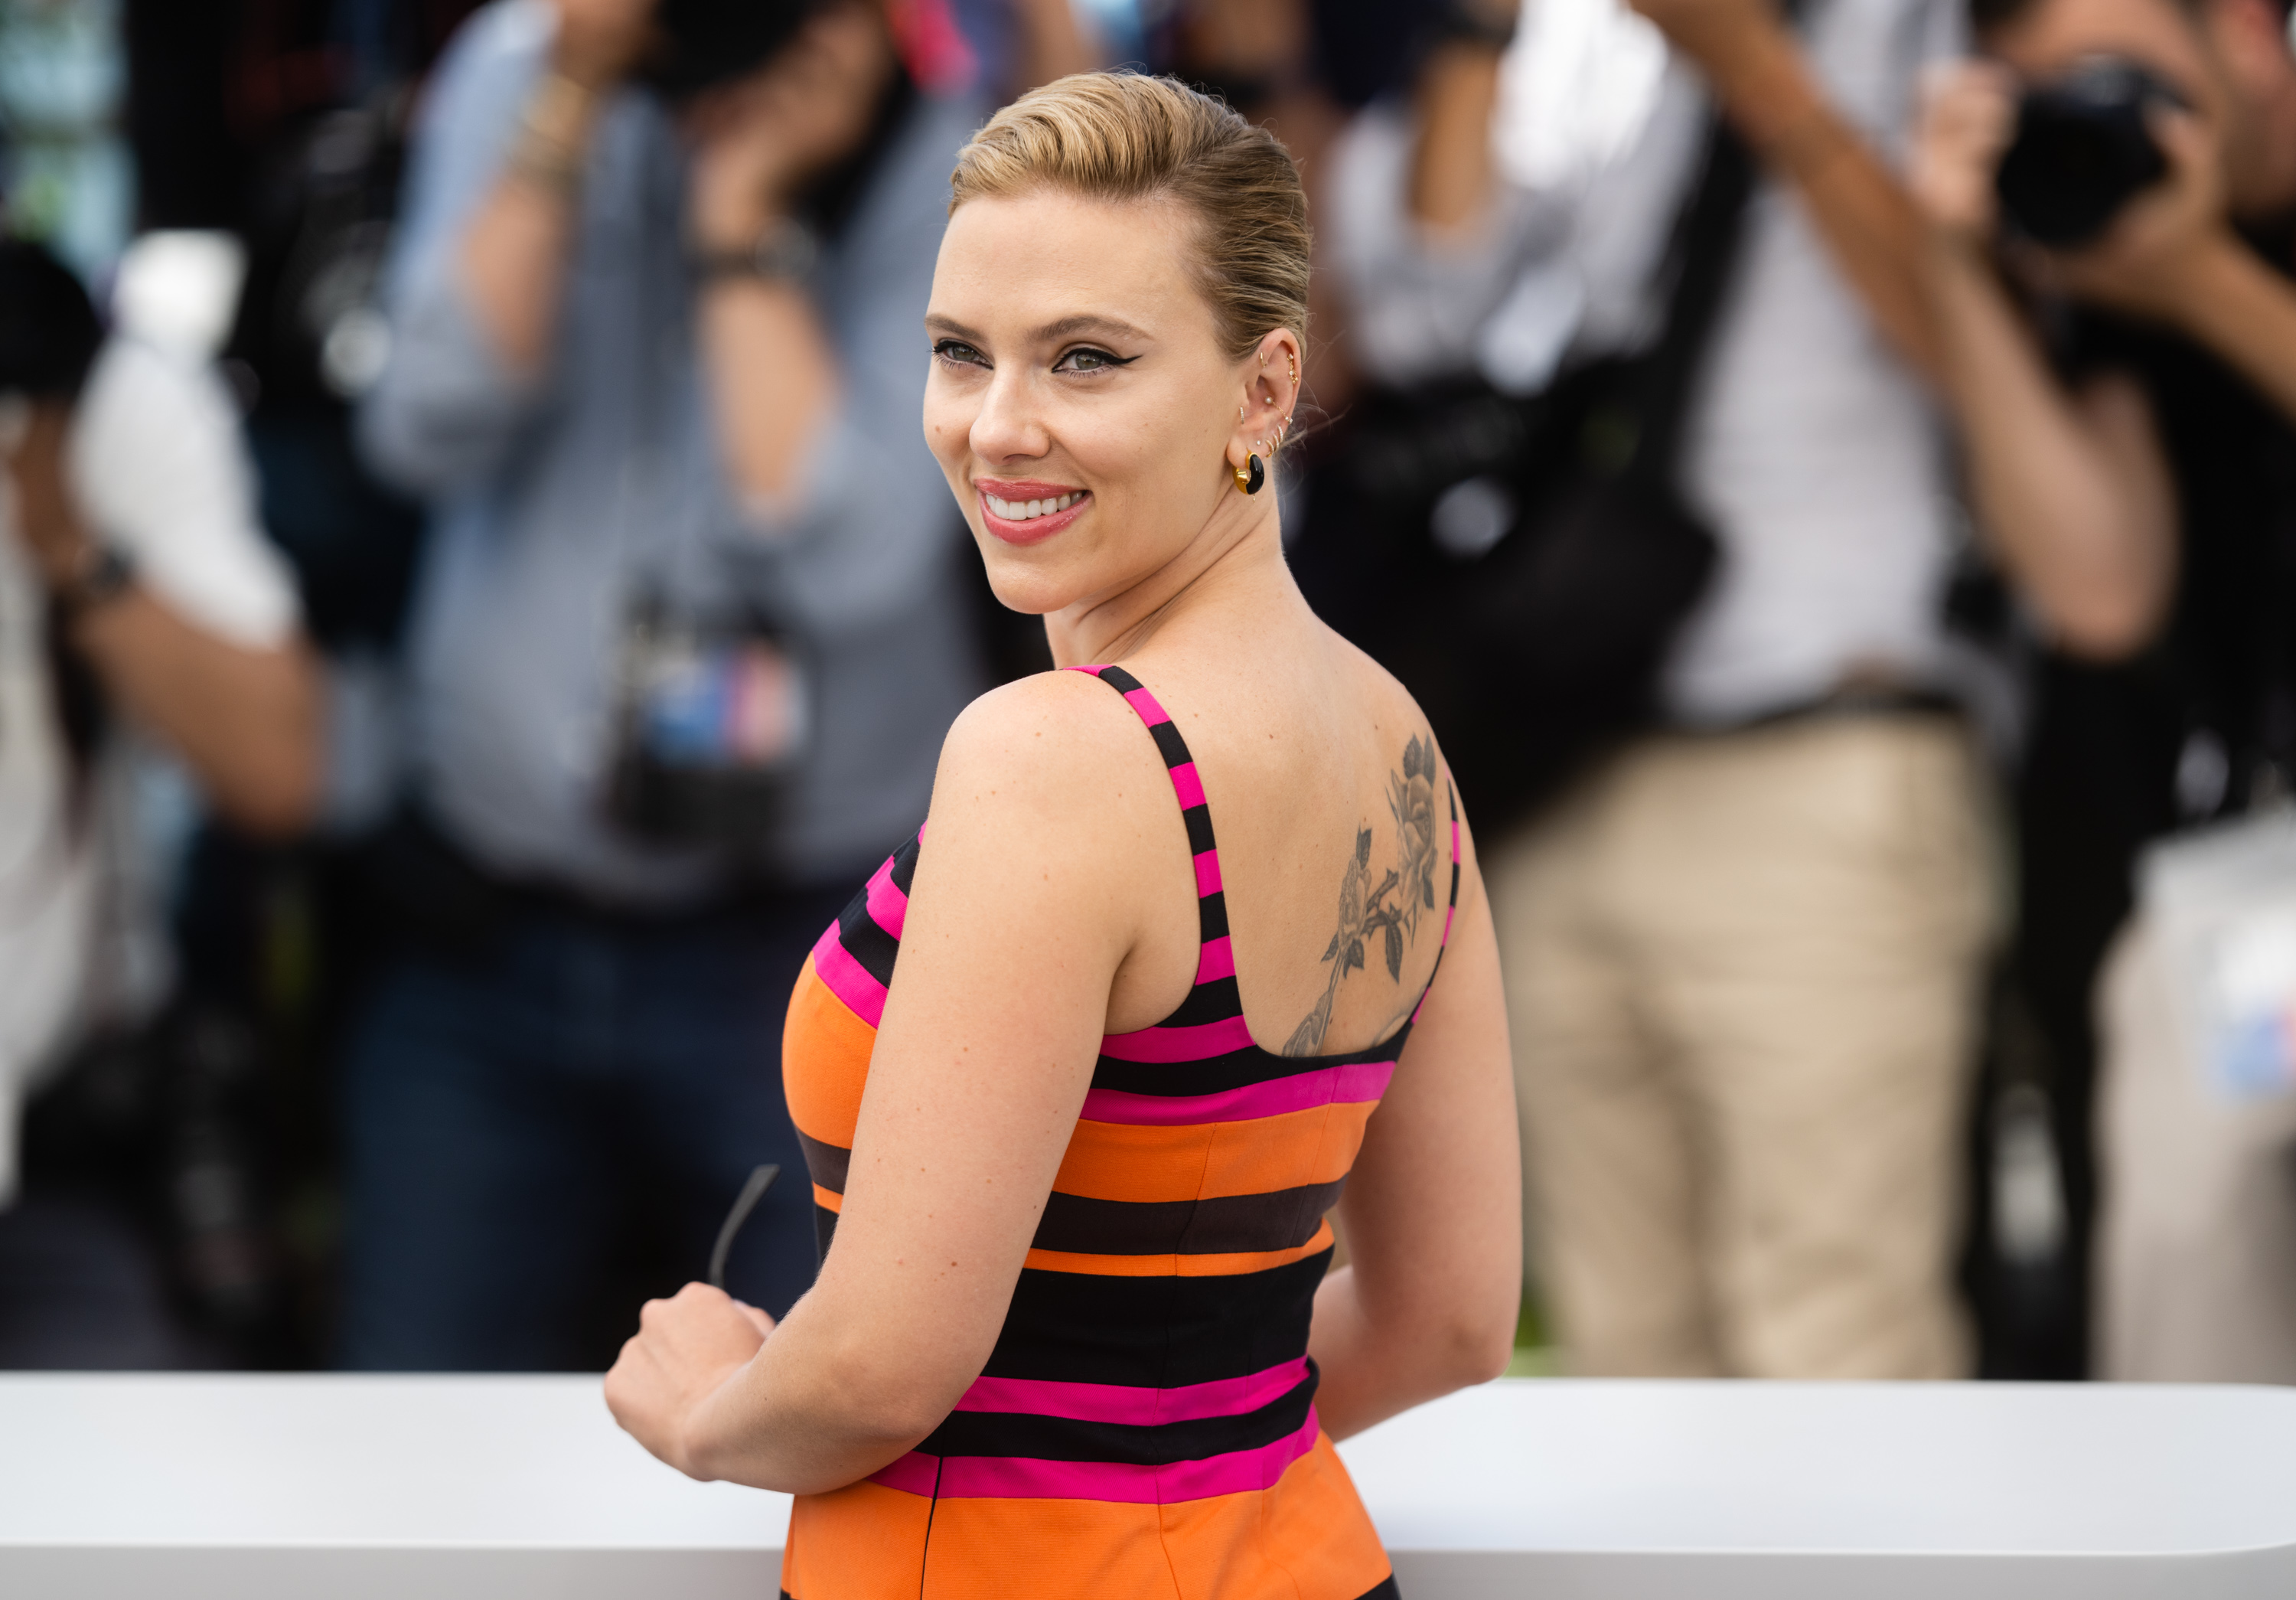 Scarlett Johansson attends the "Asteroid City" photocall at the 76th Annual Cannes Film Festival at Palais des Festivals on May 24, 2023 in Cannes, France. | Source: Getty Images